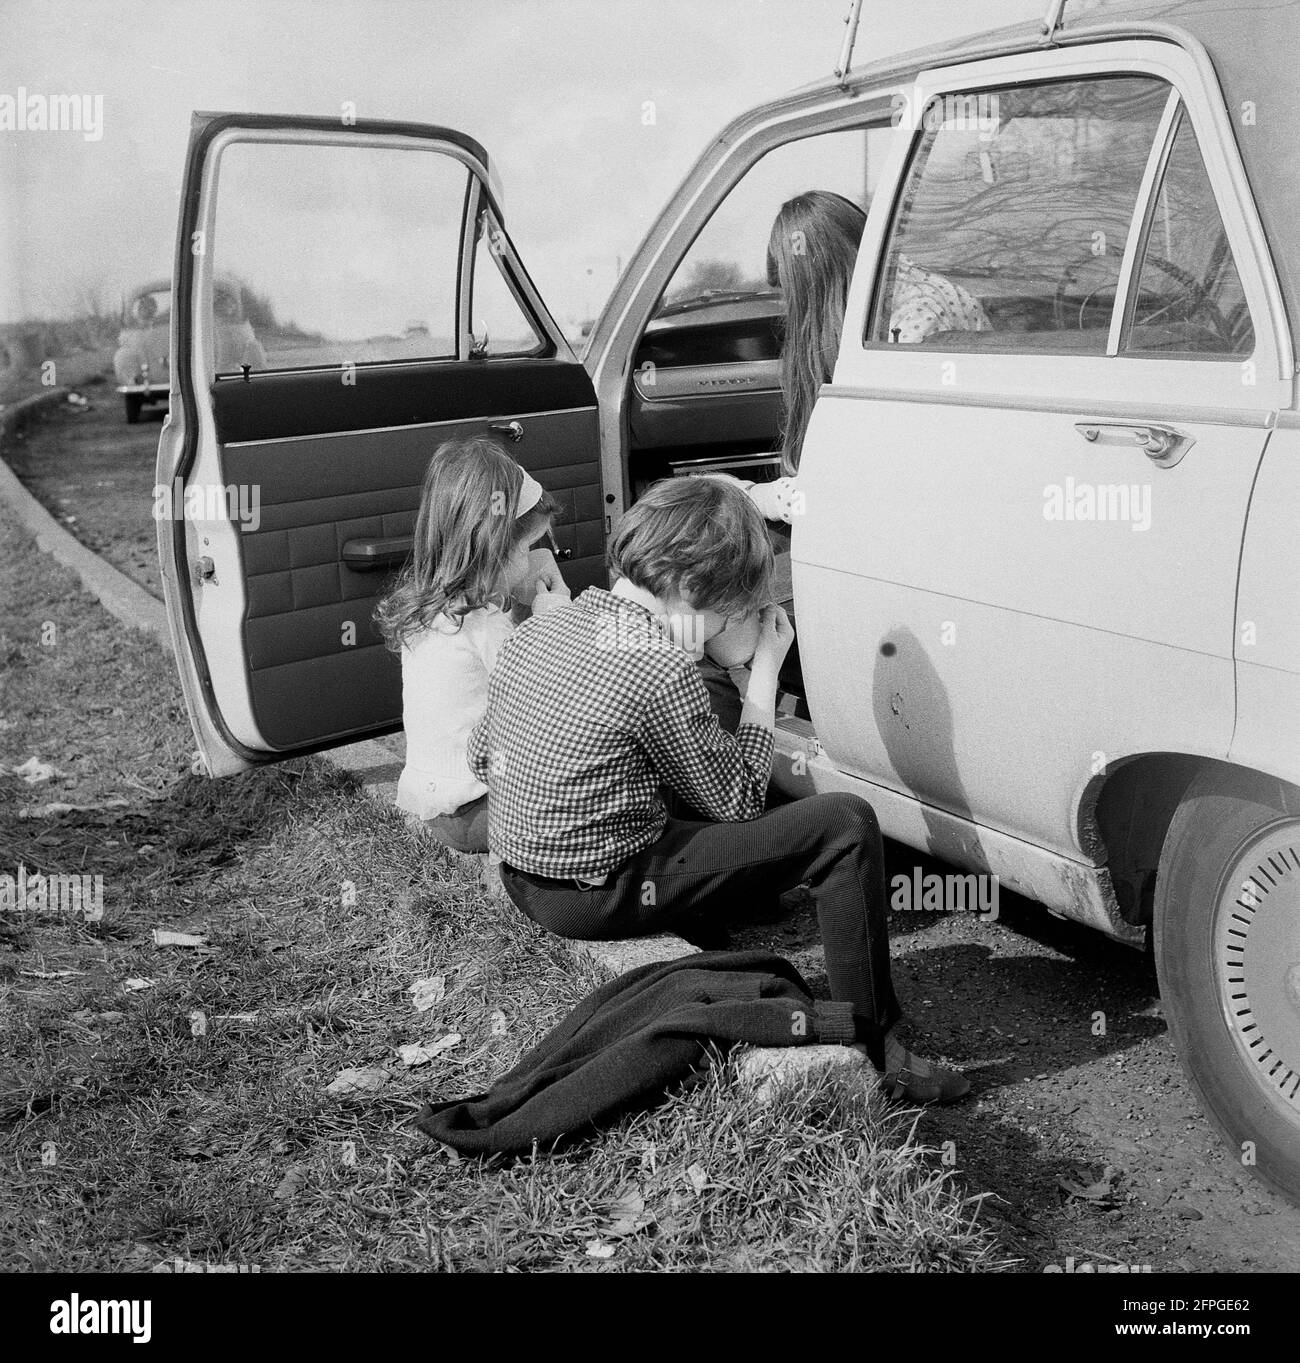 1969, historical, two children sitting on the kerb, having a drink, waiting outside their dad's car, which is parked on a roadside parking area, Wrotham Hill, Essex. England, UK. Stock Photo